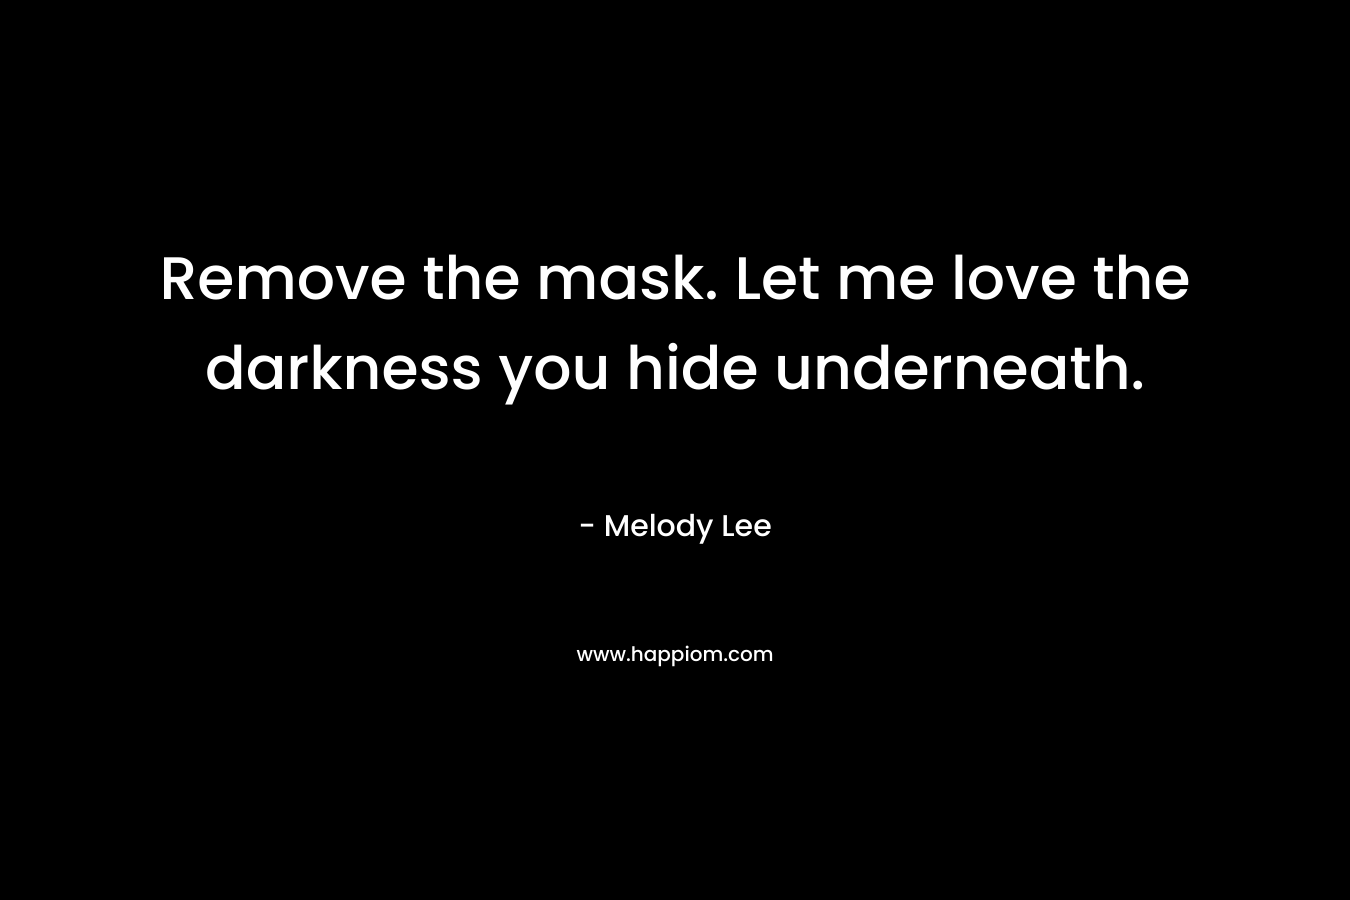 Remove the mask. Let me love the darkness you hide underneath.